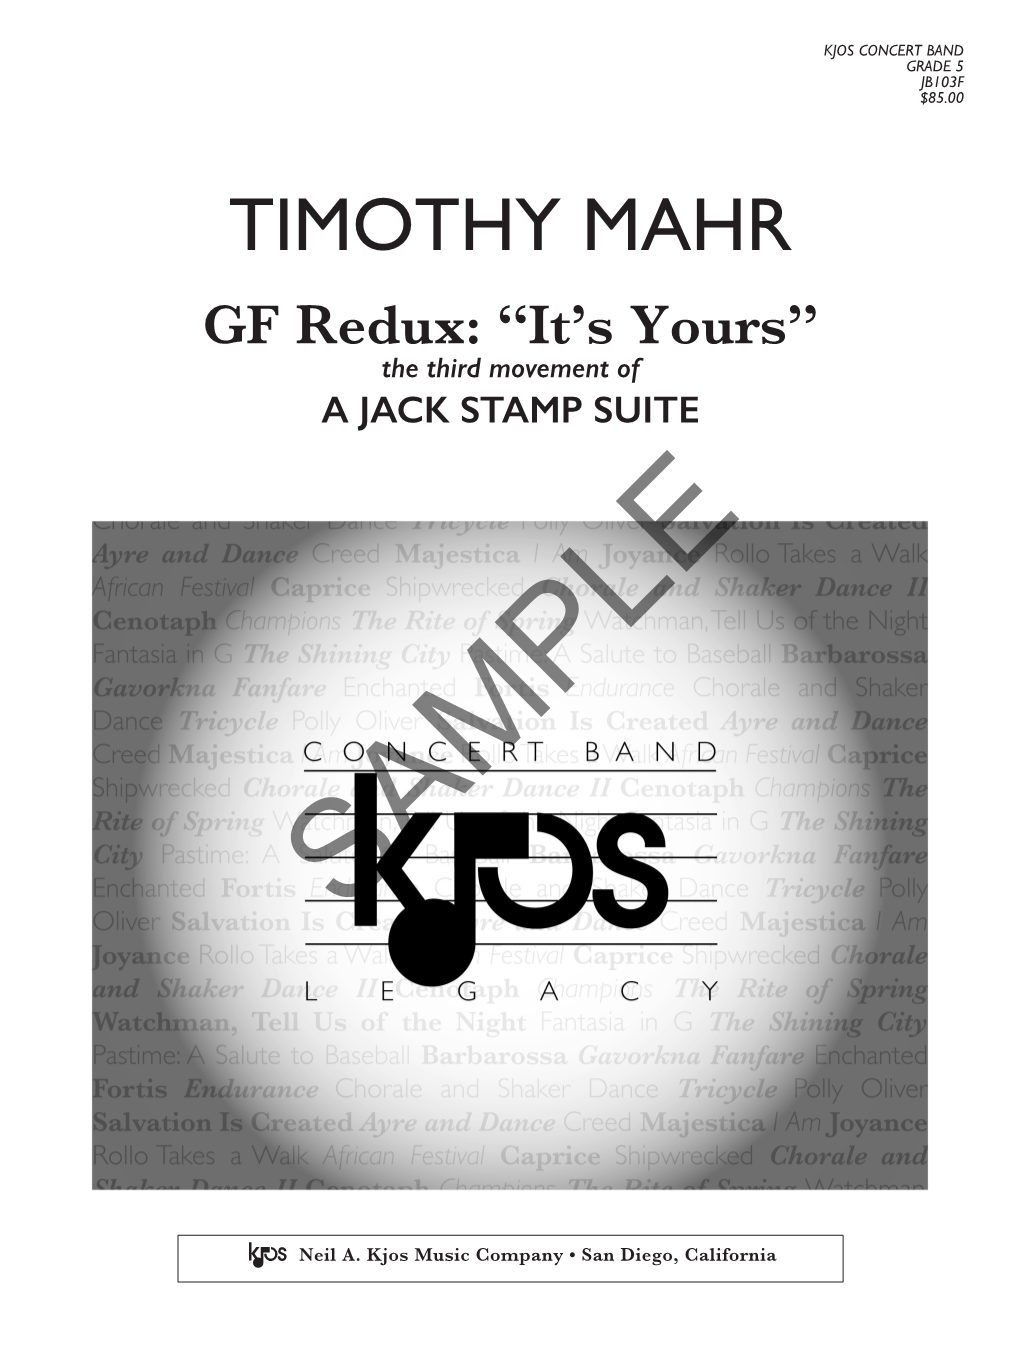 TIMOTHY MAHR GF Redux: “It’S Yours” the Third Movement of a JACK STAMP SUITE